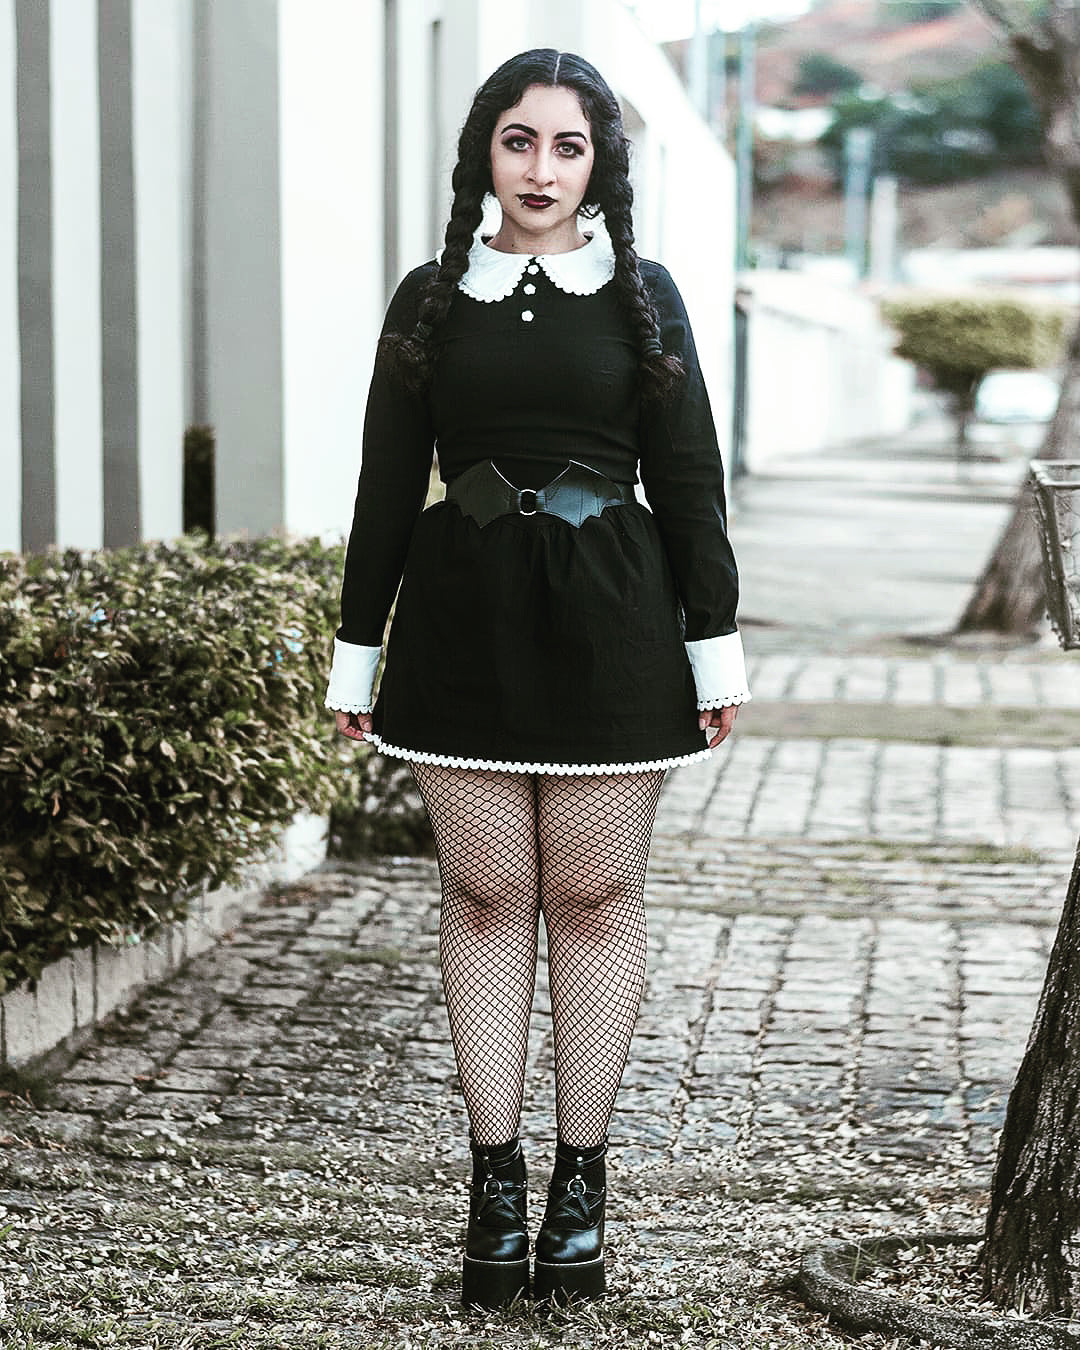 The Serious Wednesday Dress - Goth Mall